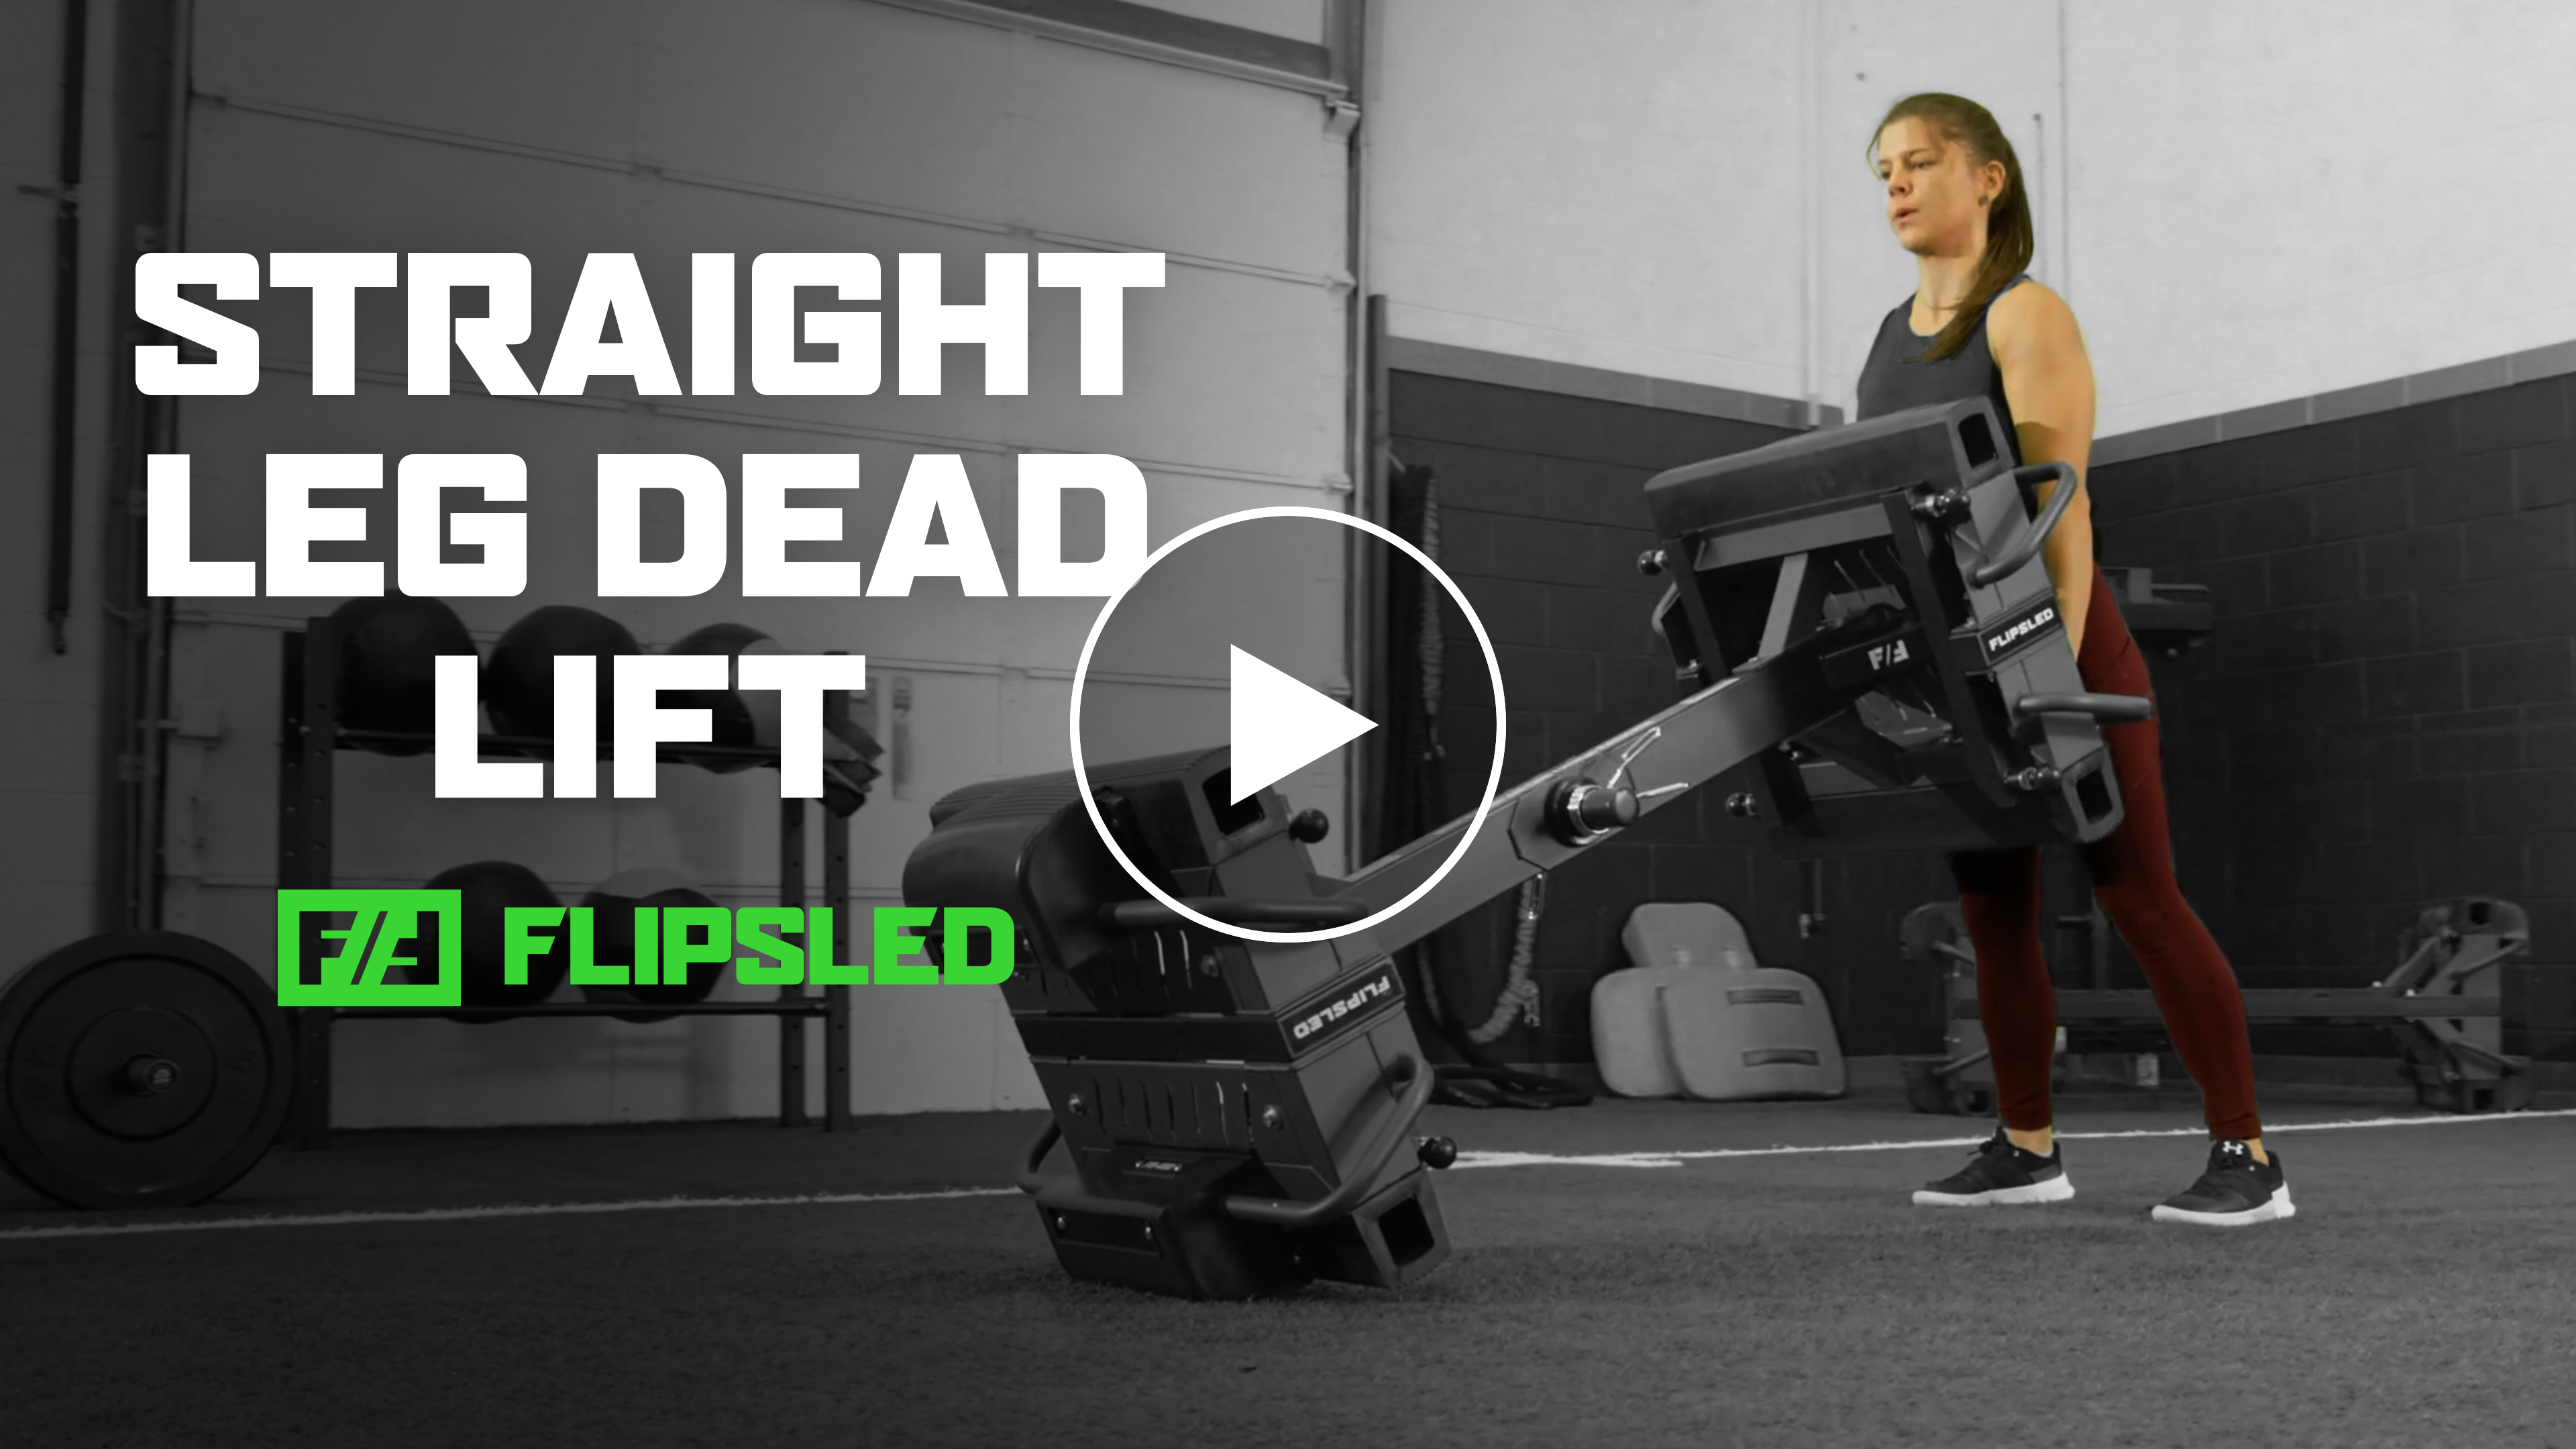 Move of the Week: Straight Leg Dead Lift